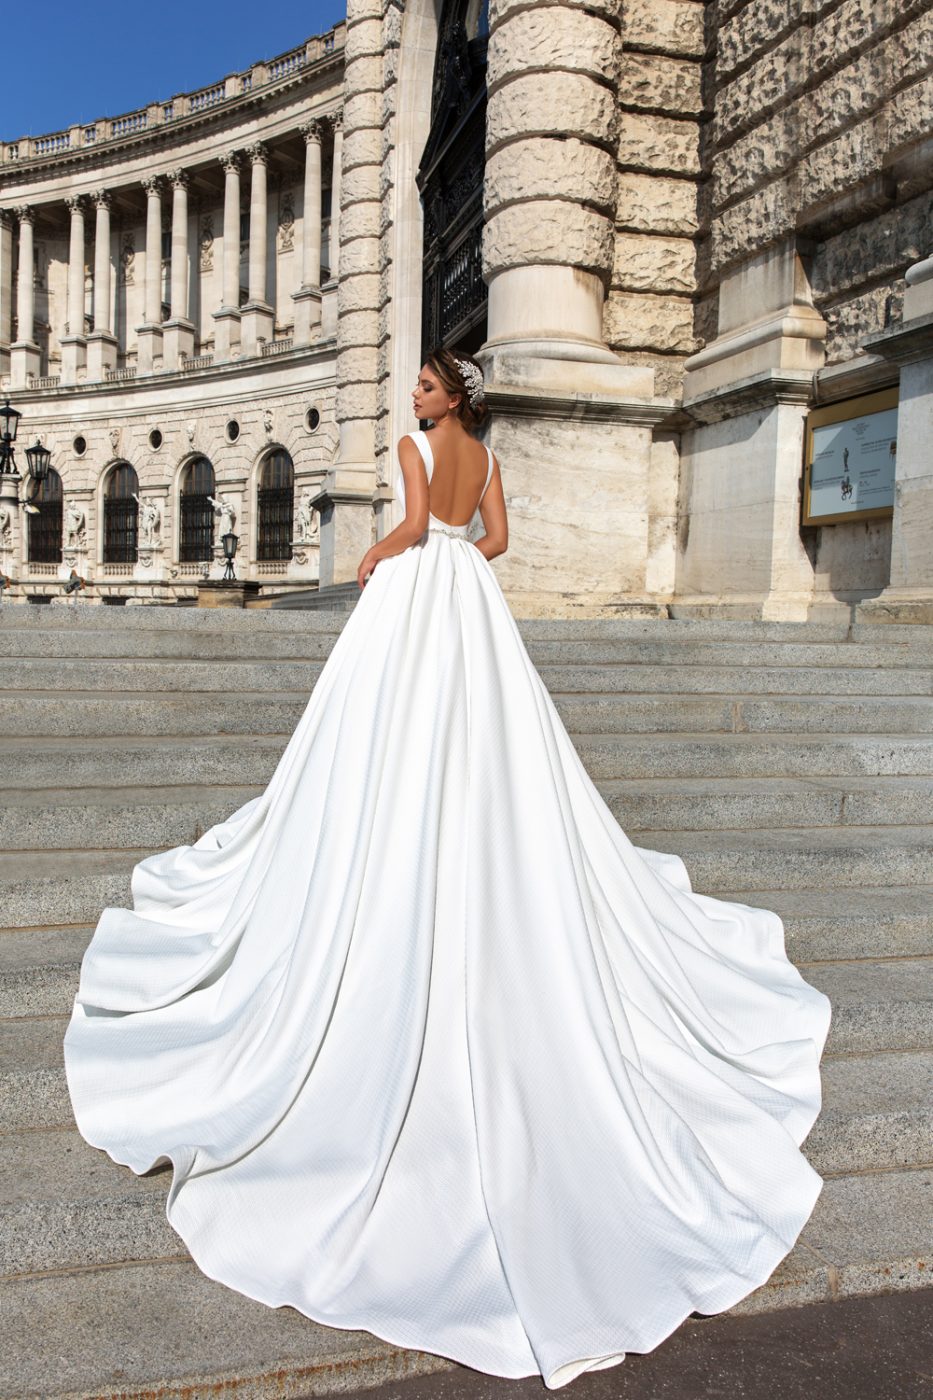 Backless satin ballgown by Crystal Design Couture